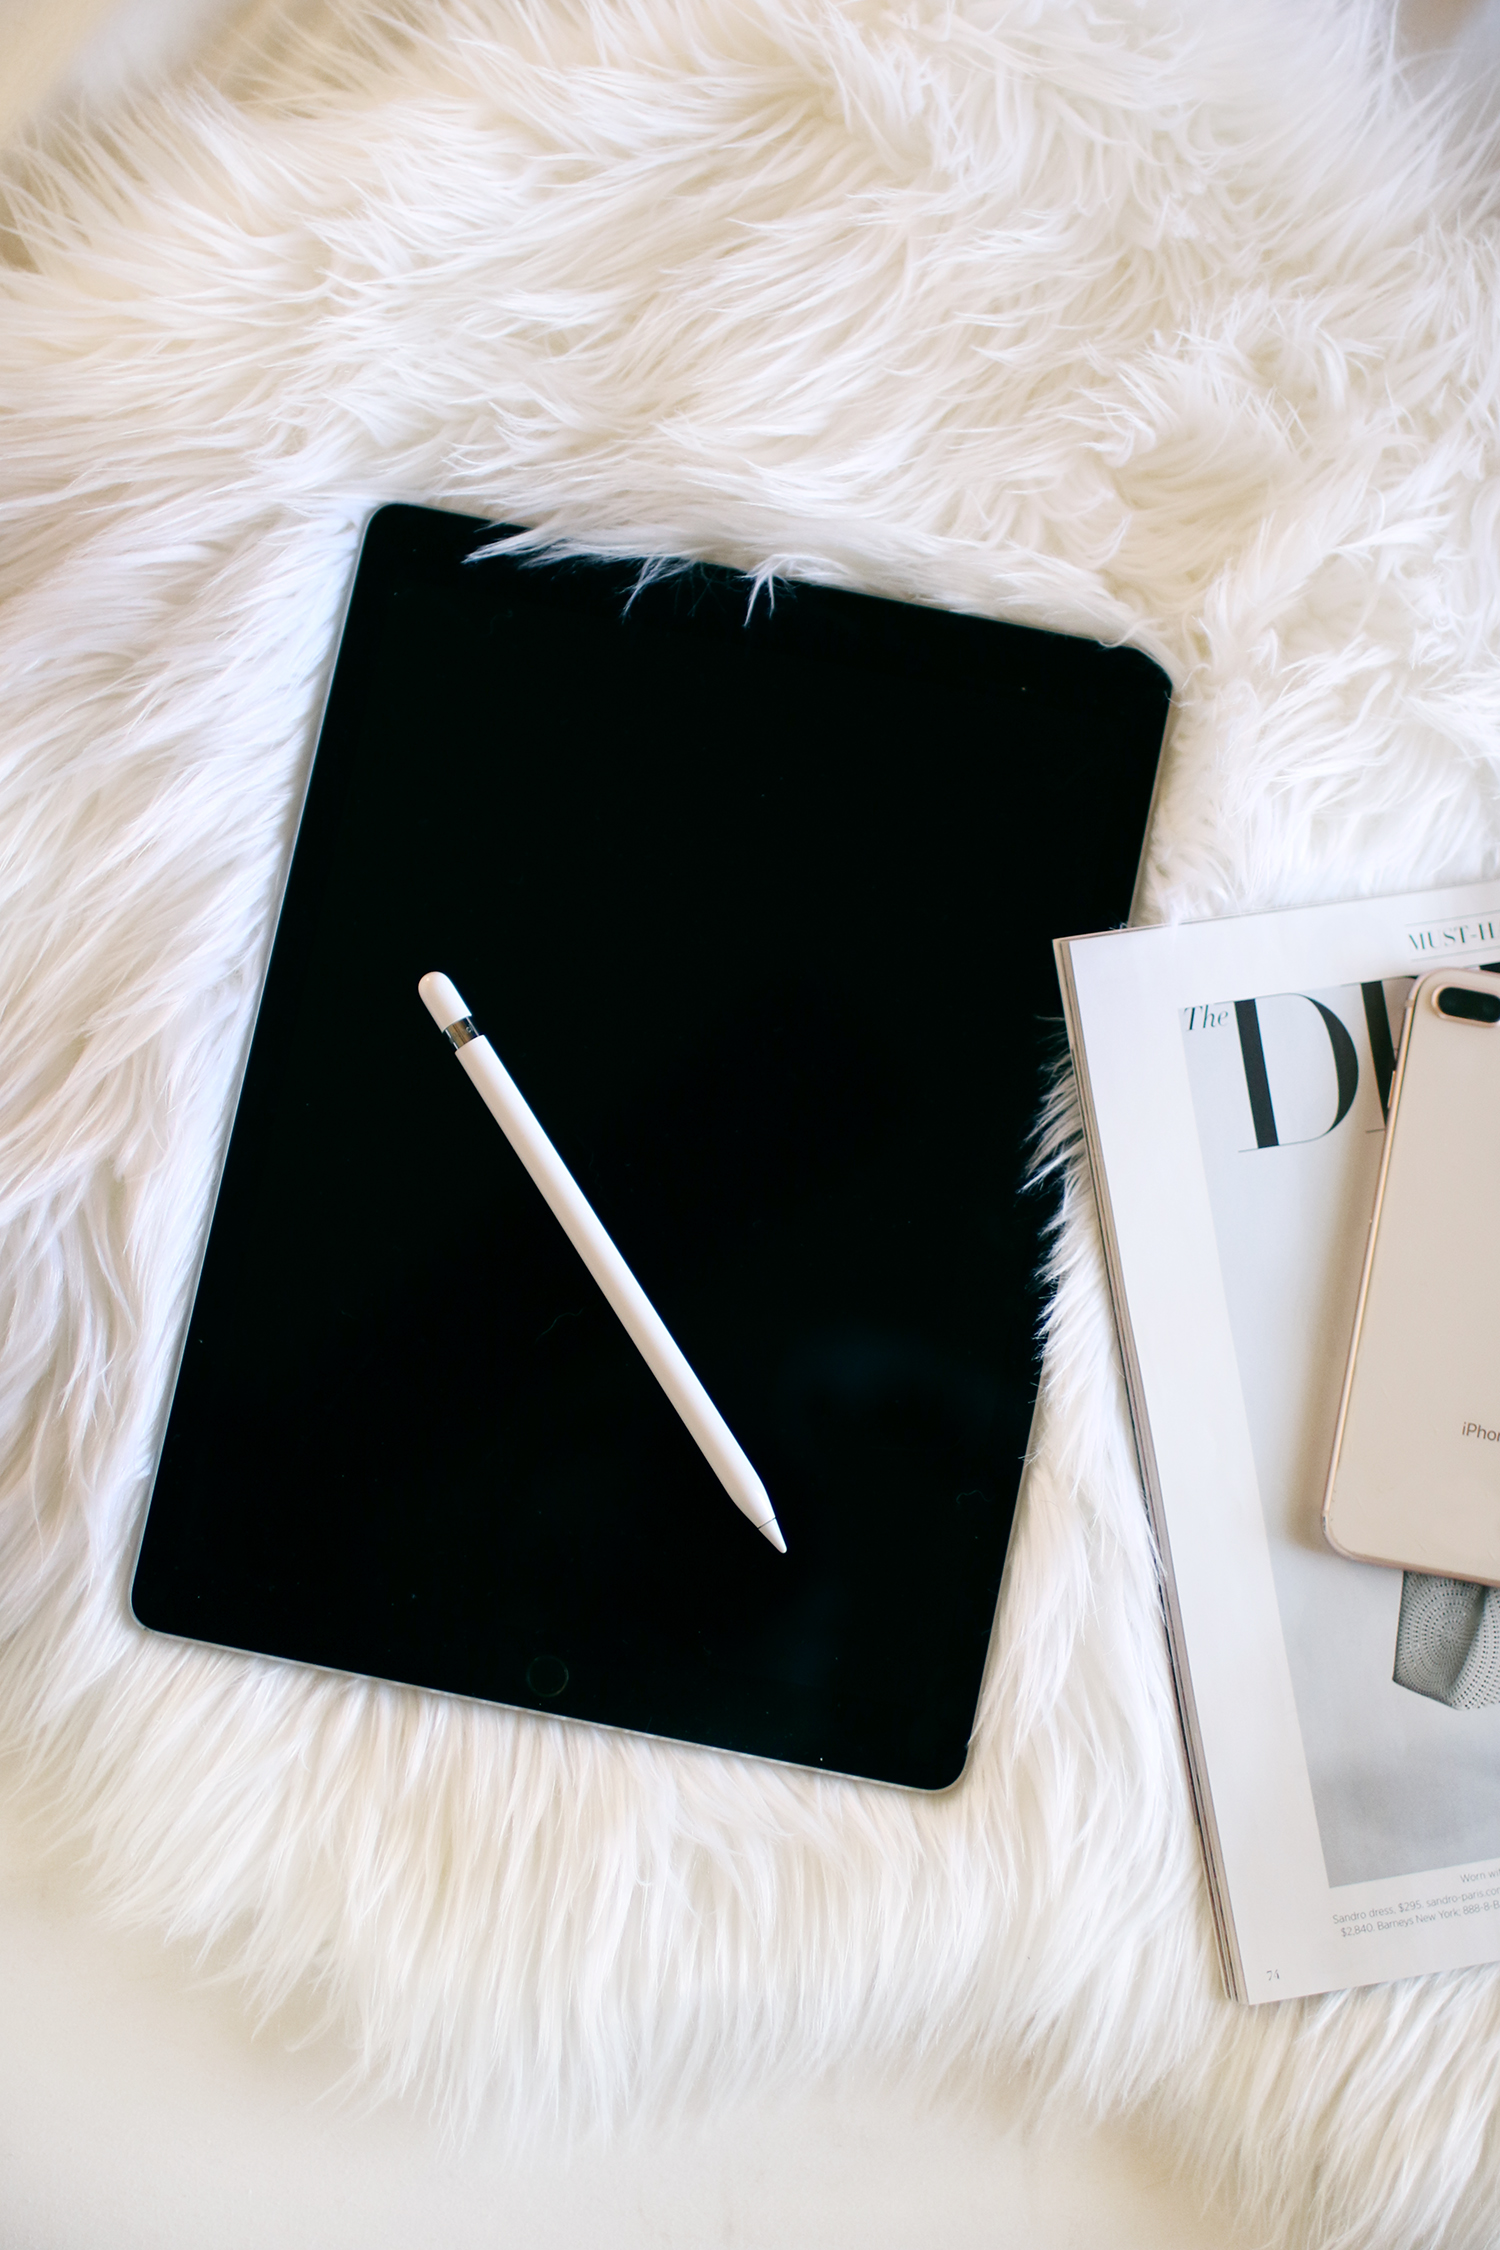 Another round of my latest finds and obsessions for the month of April and this time I am sharing all about my review of the iPad Pro and the accessories I found to be the perfect fit. Catch it all over on Haus of Layne! #iPadProReview #ApplePencil #Apple #TechReview